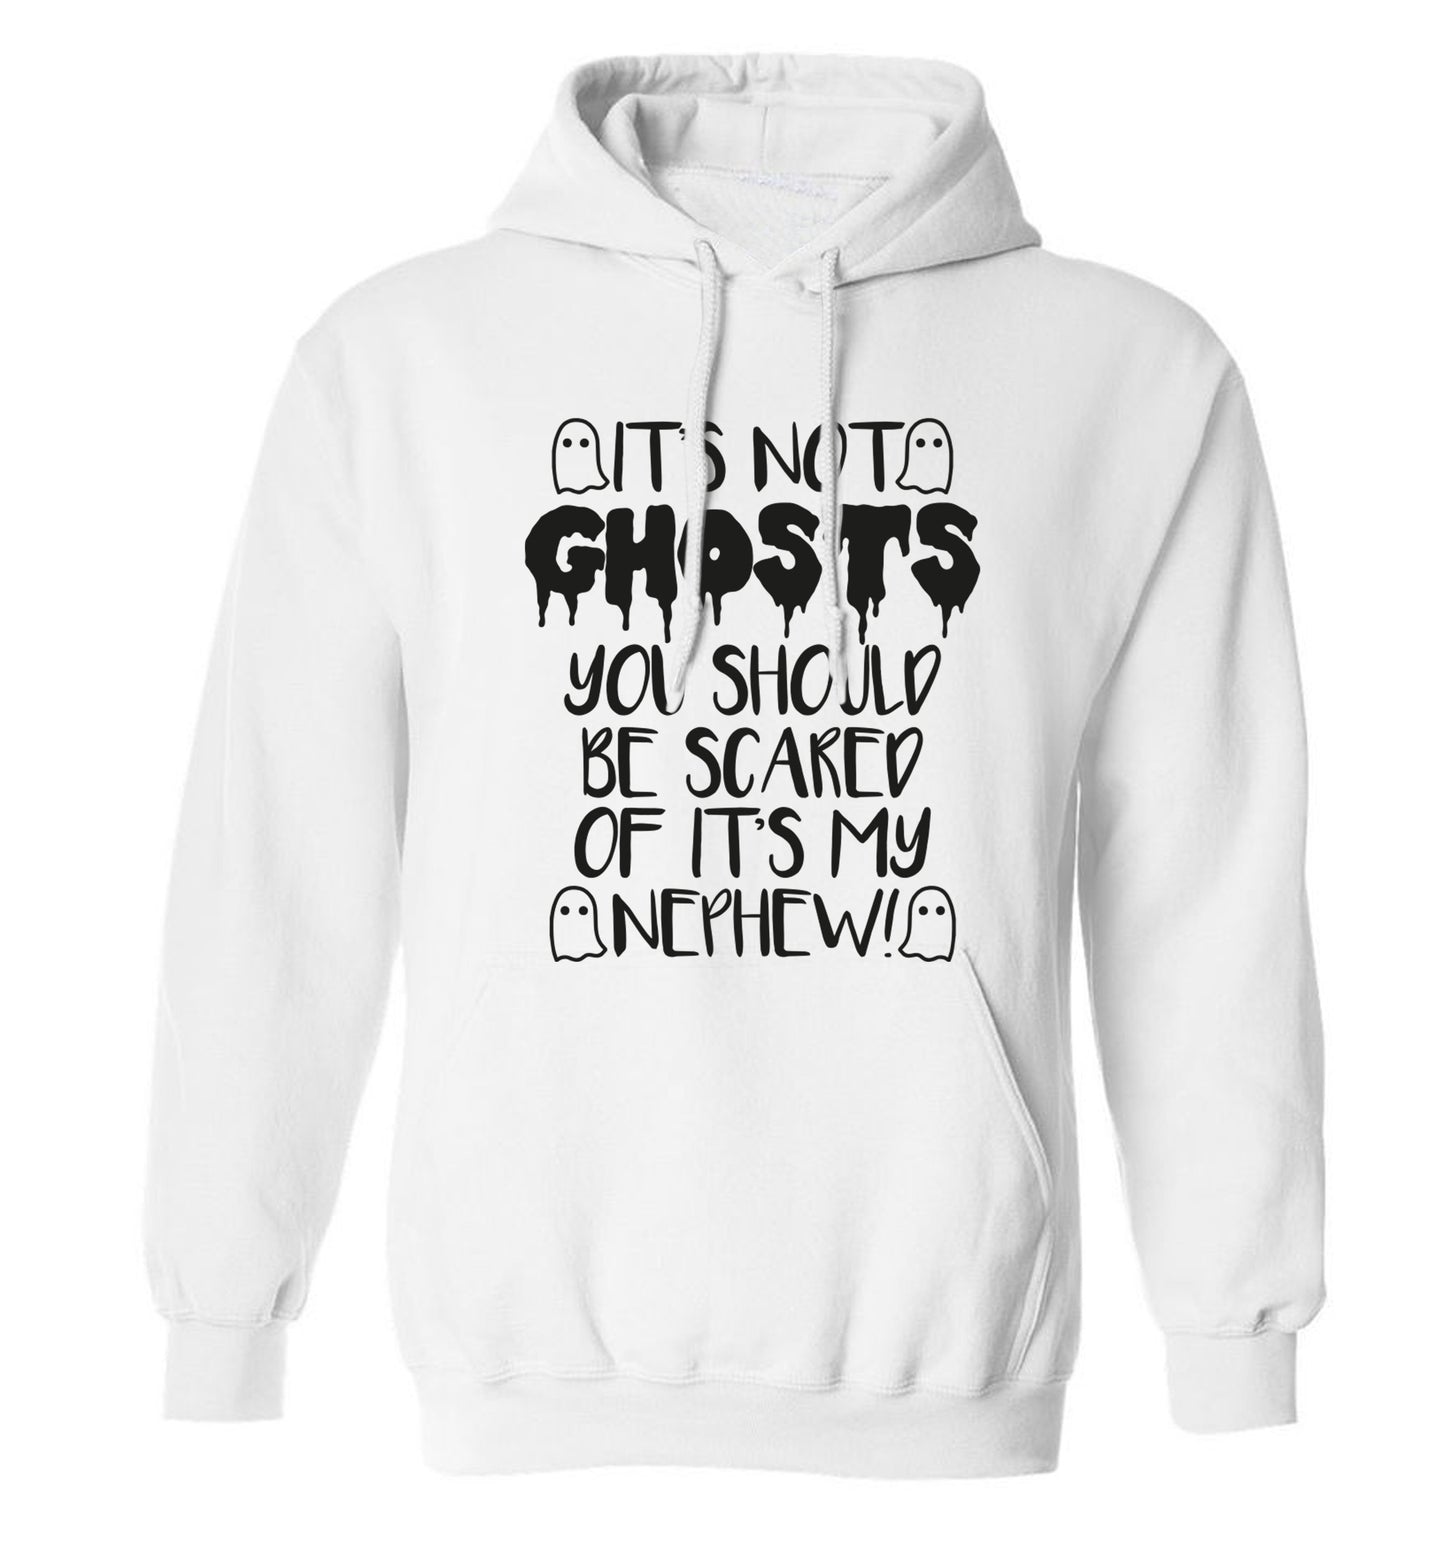 It's not ghosts you should be scared of it's my nephew! adults unisex white hoodie 2XL